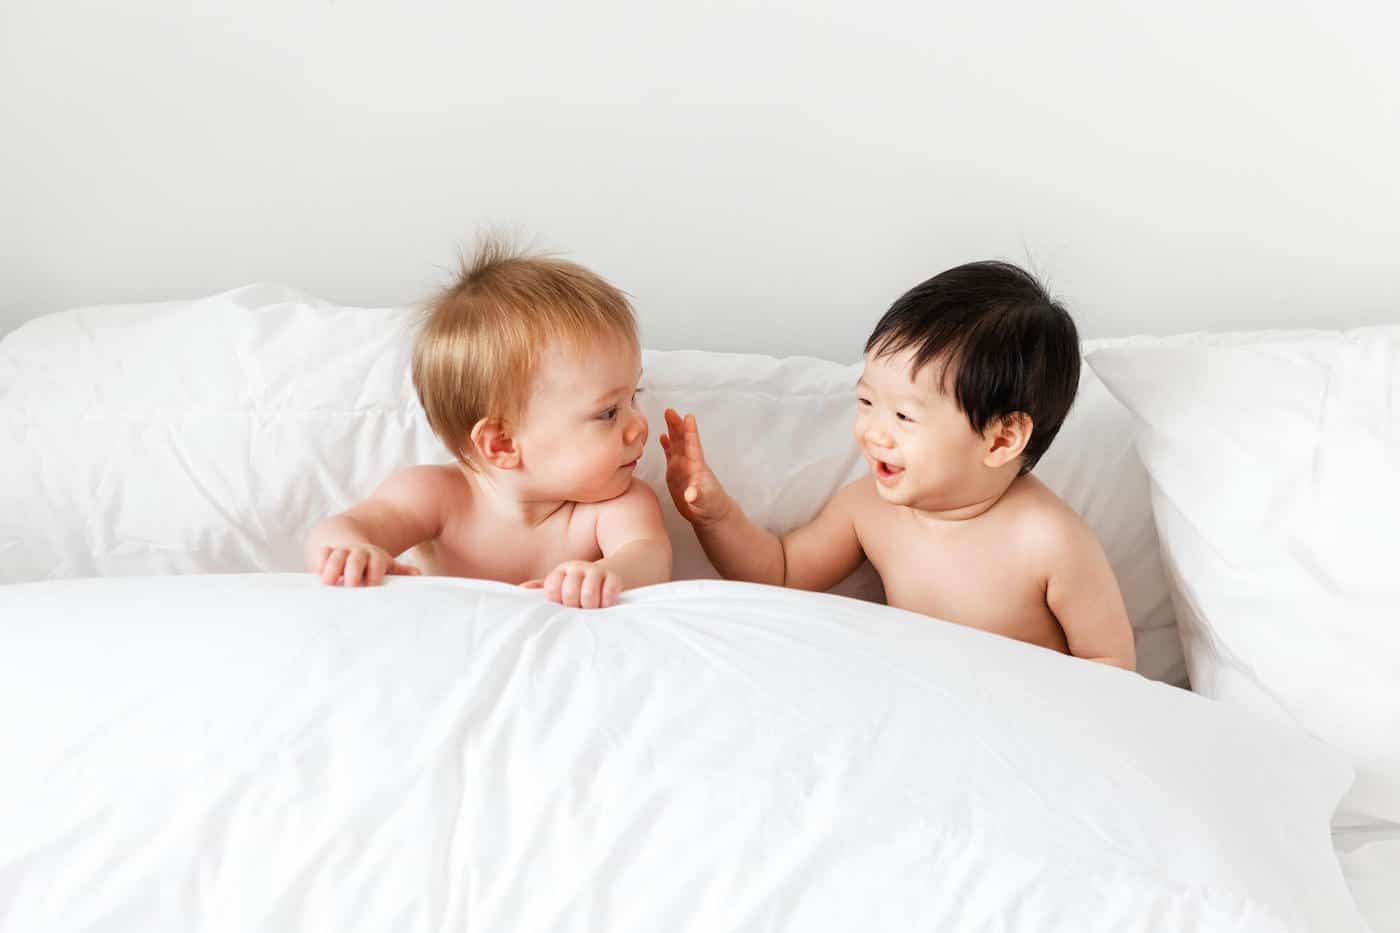 two baby boys sitting in bed